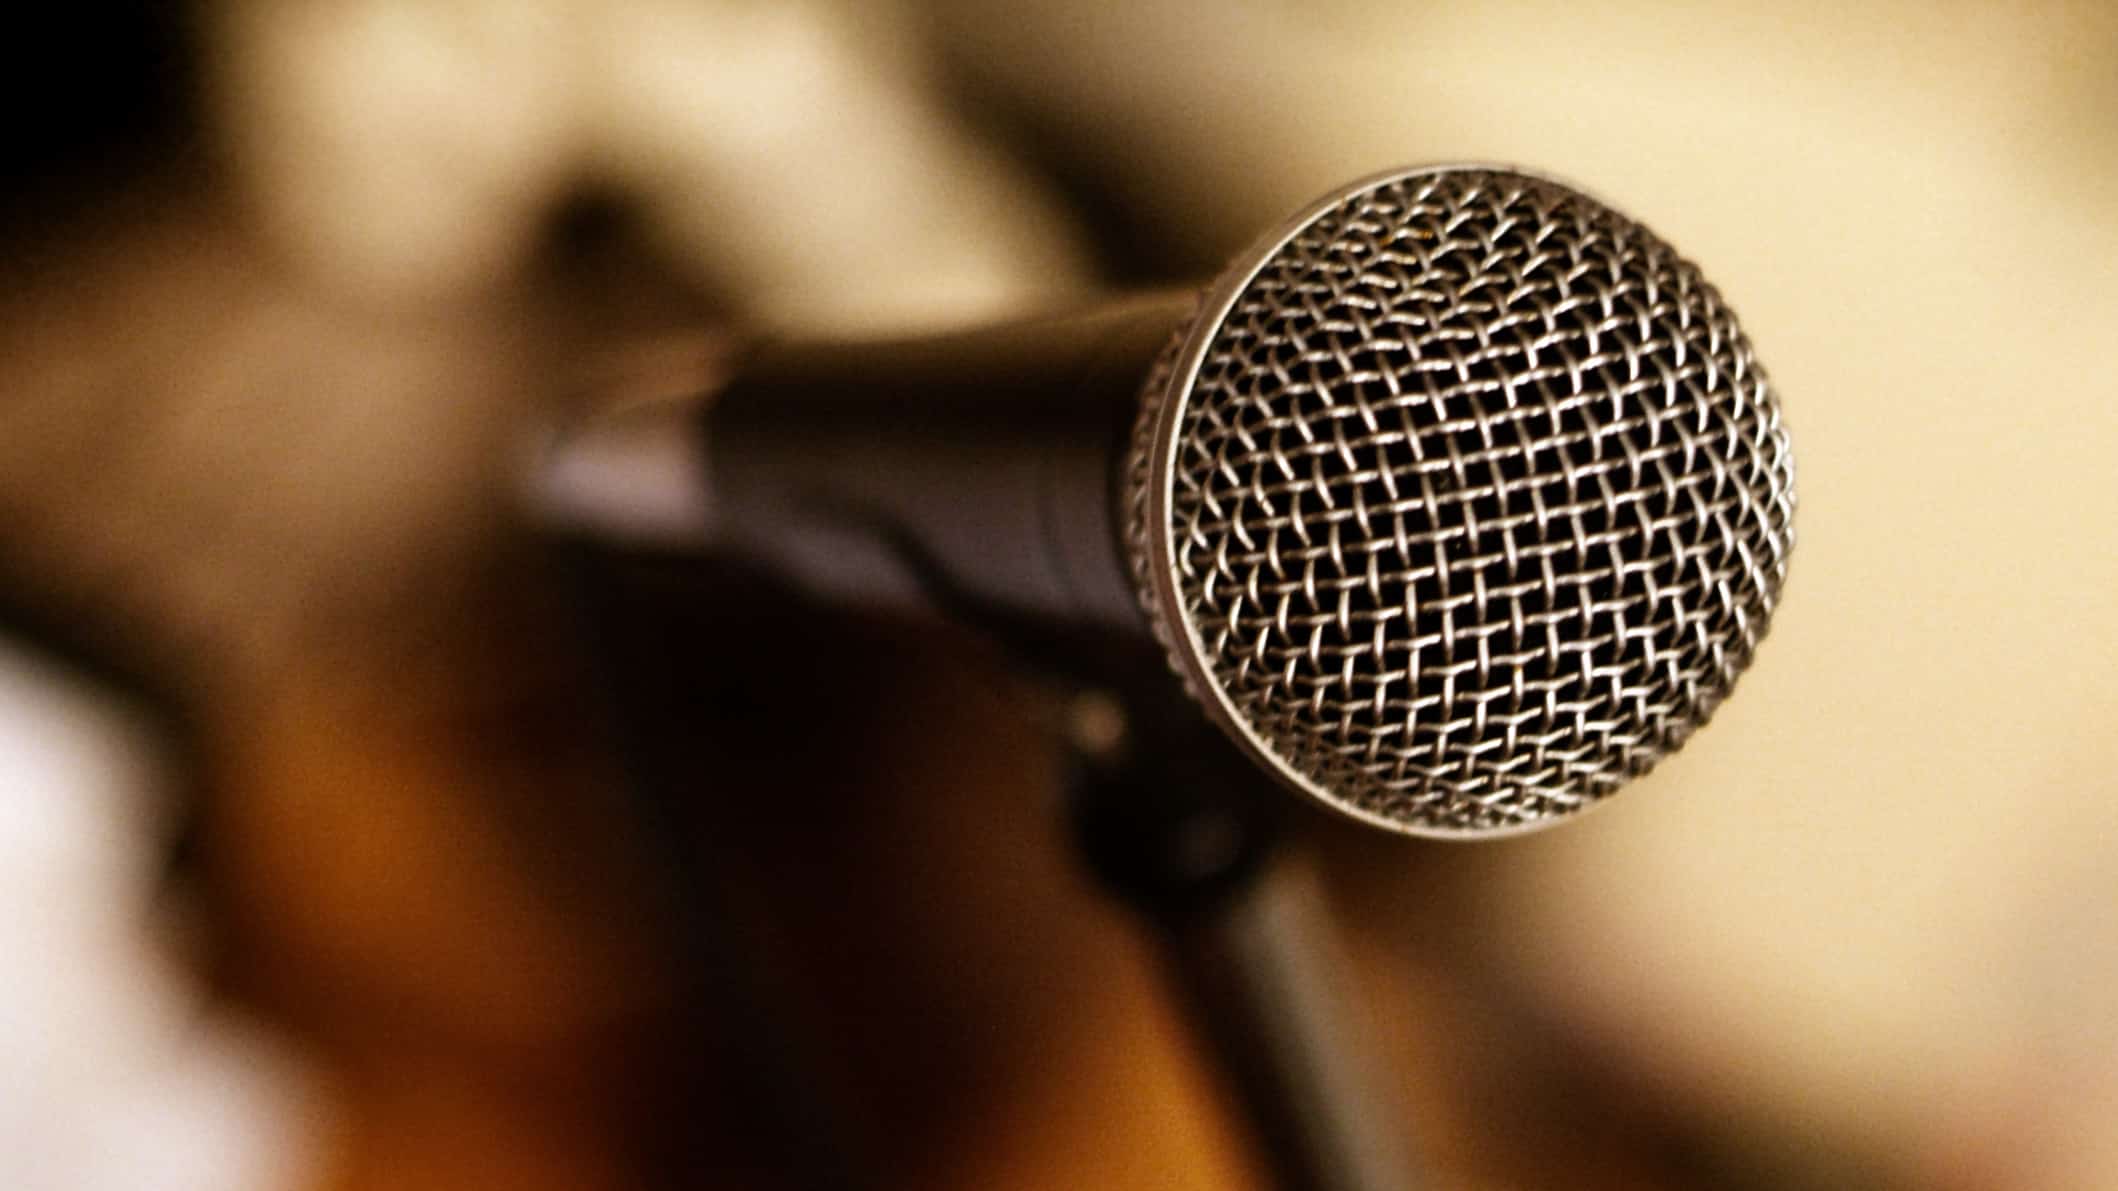 Microphone. Courtesy image by Lincoln Blues.